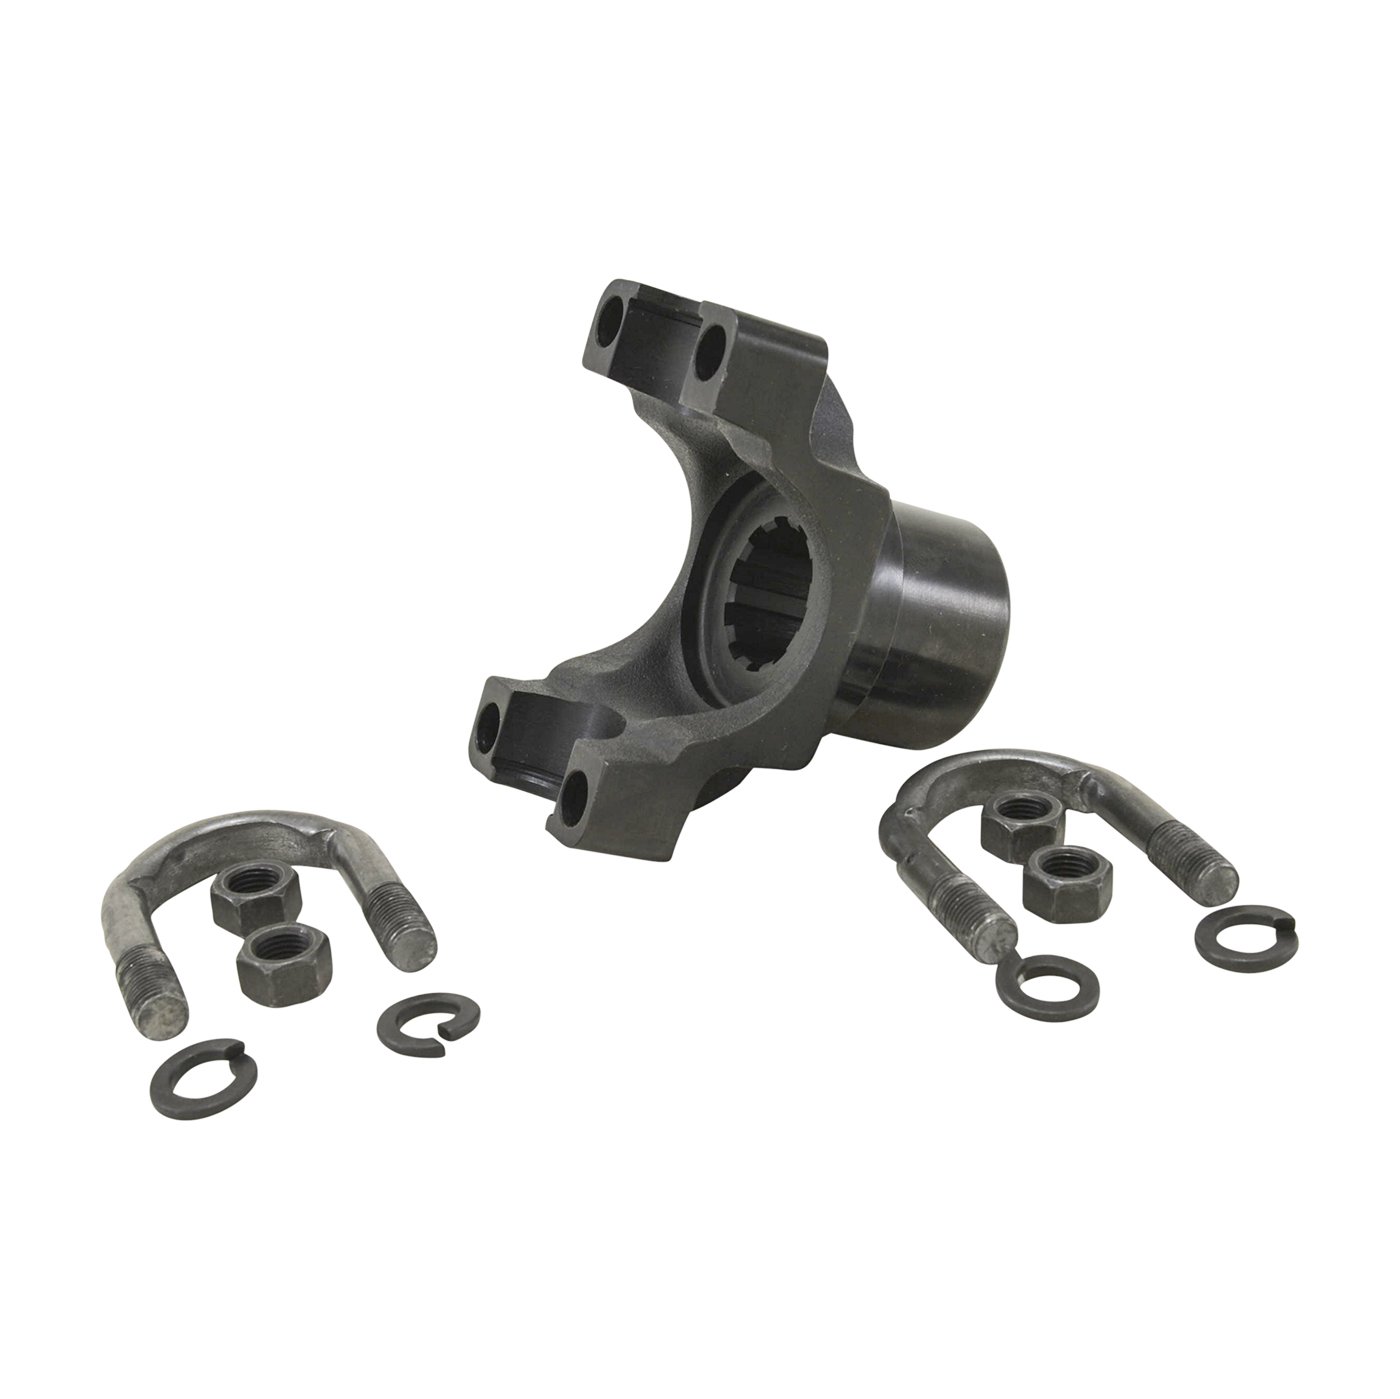 Extra Hd Yoke For Chrysler 8.75 in. With 29 Spline Pinion And A 1350 U-Joint